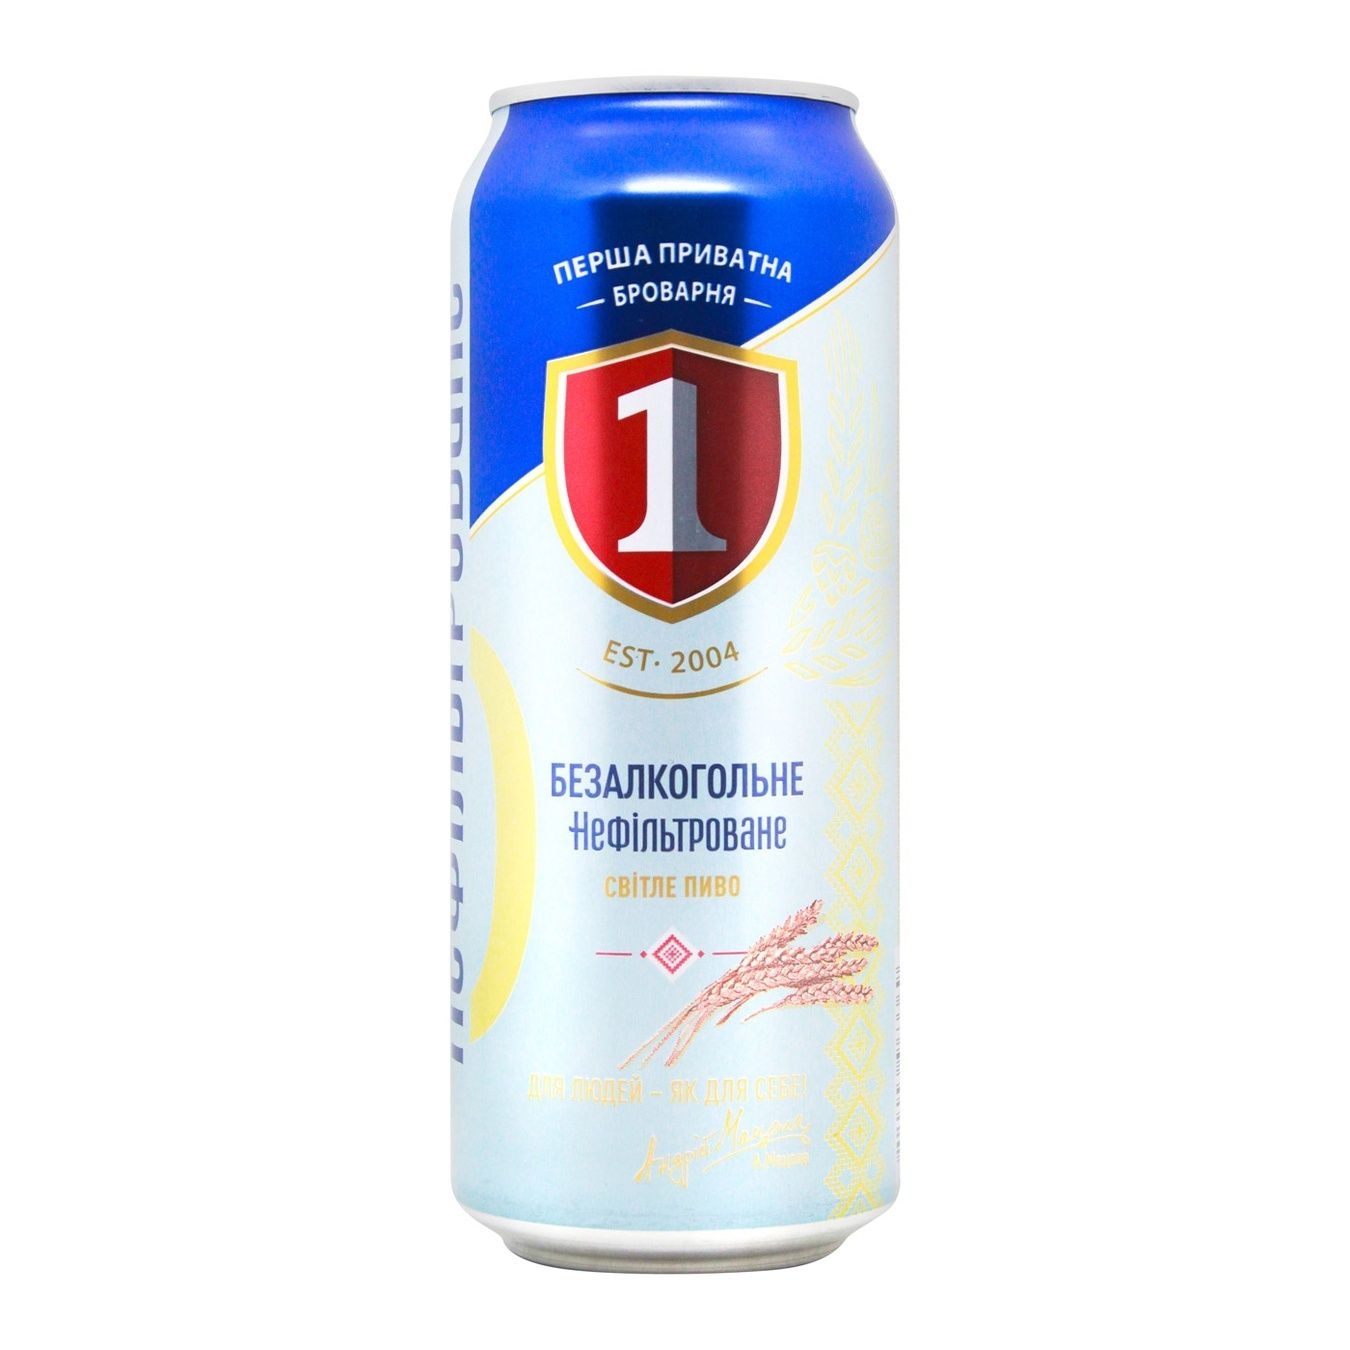 Beer non-alcoholic, light, unfiltered PPB 4*0.5 l, b/w